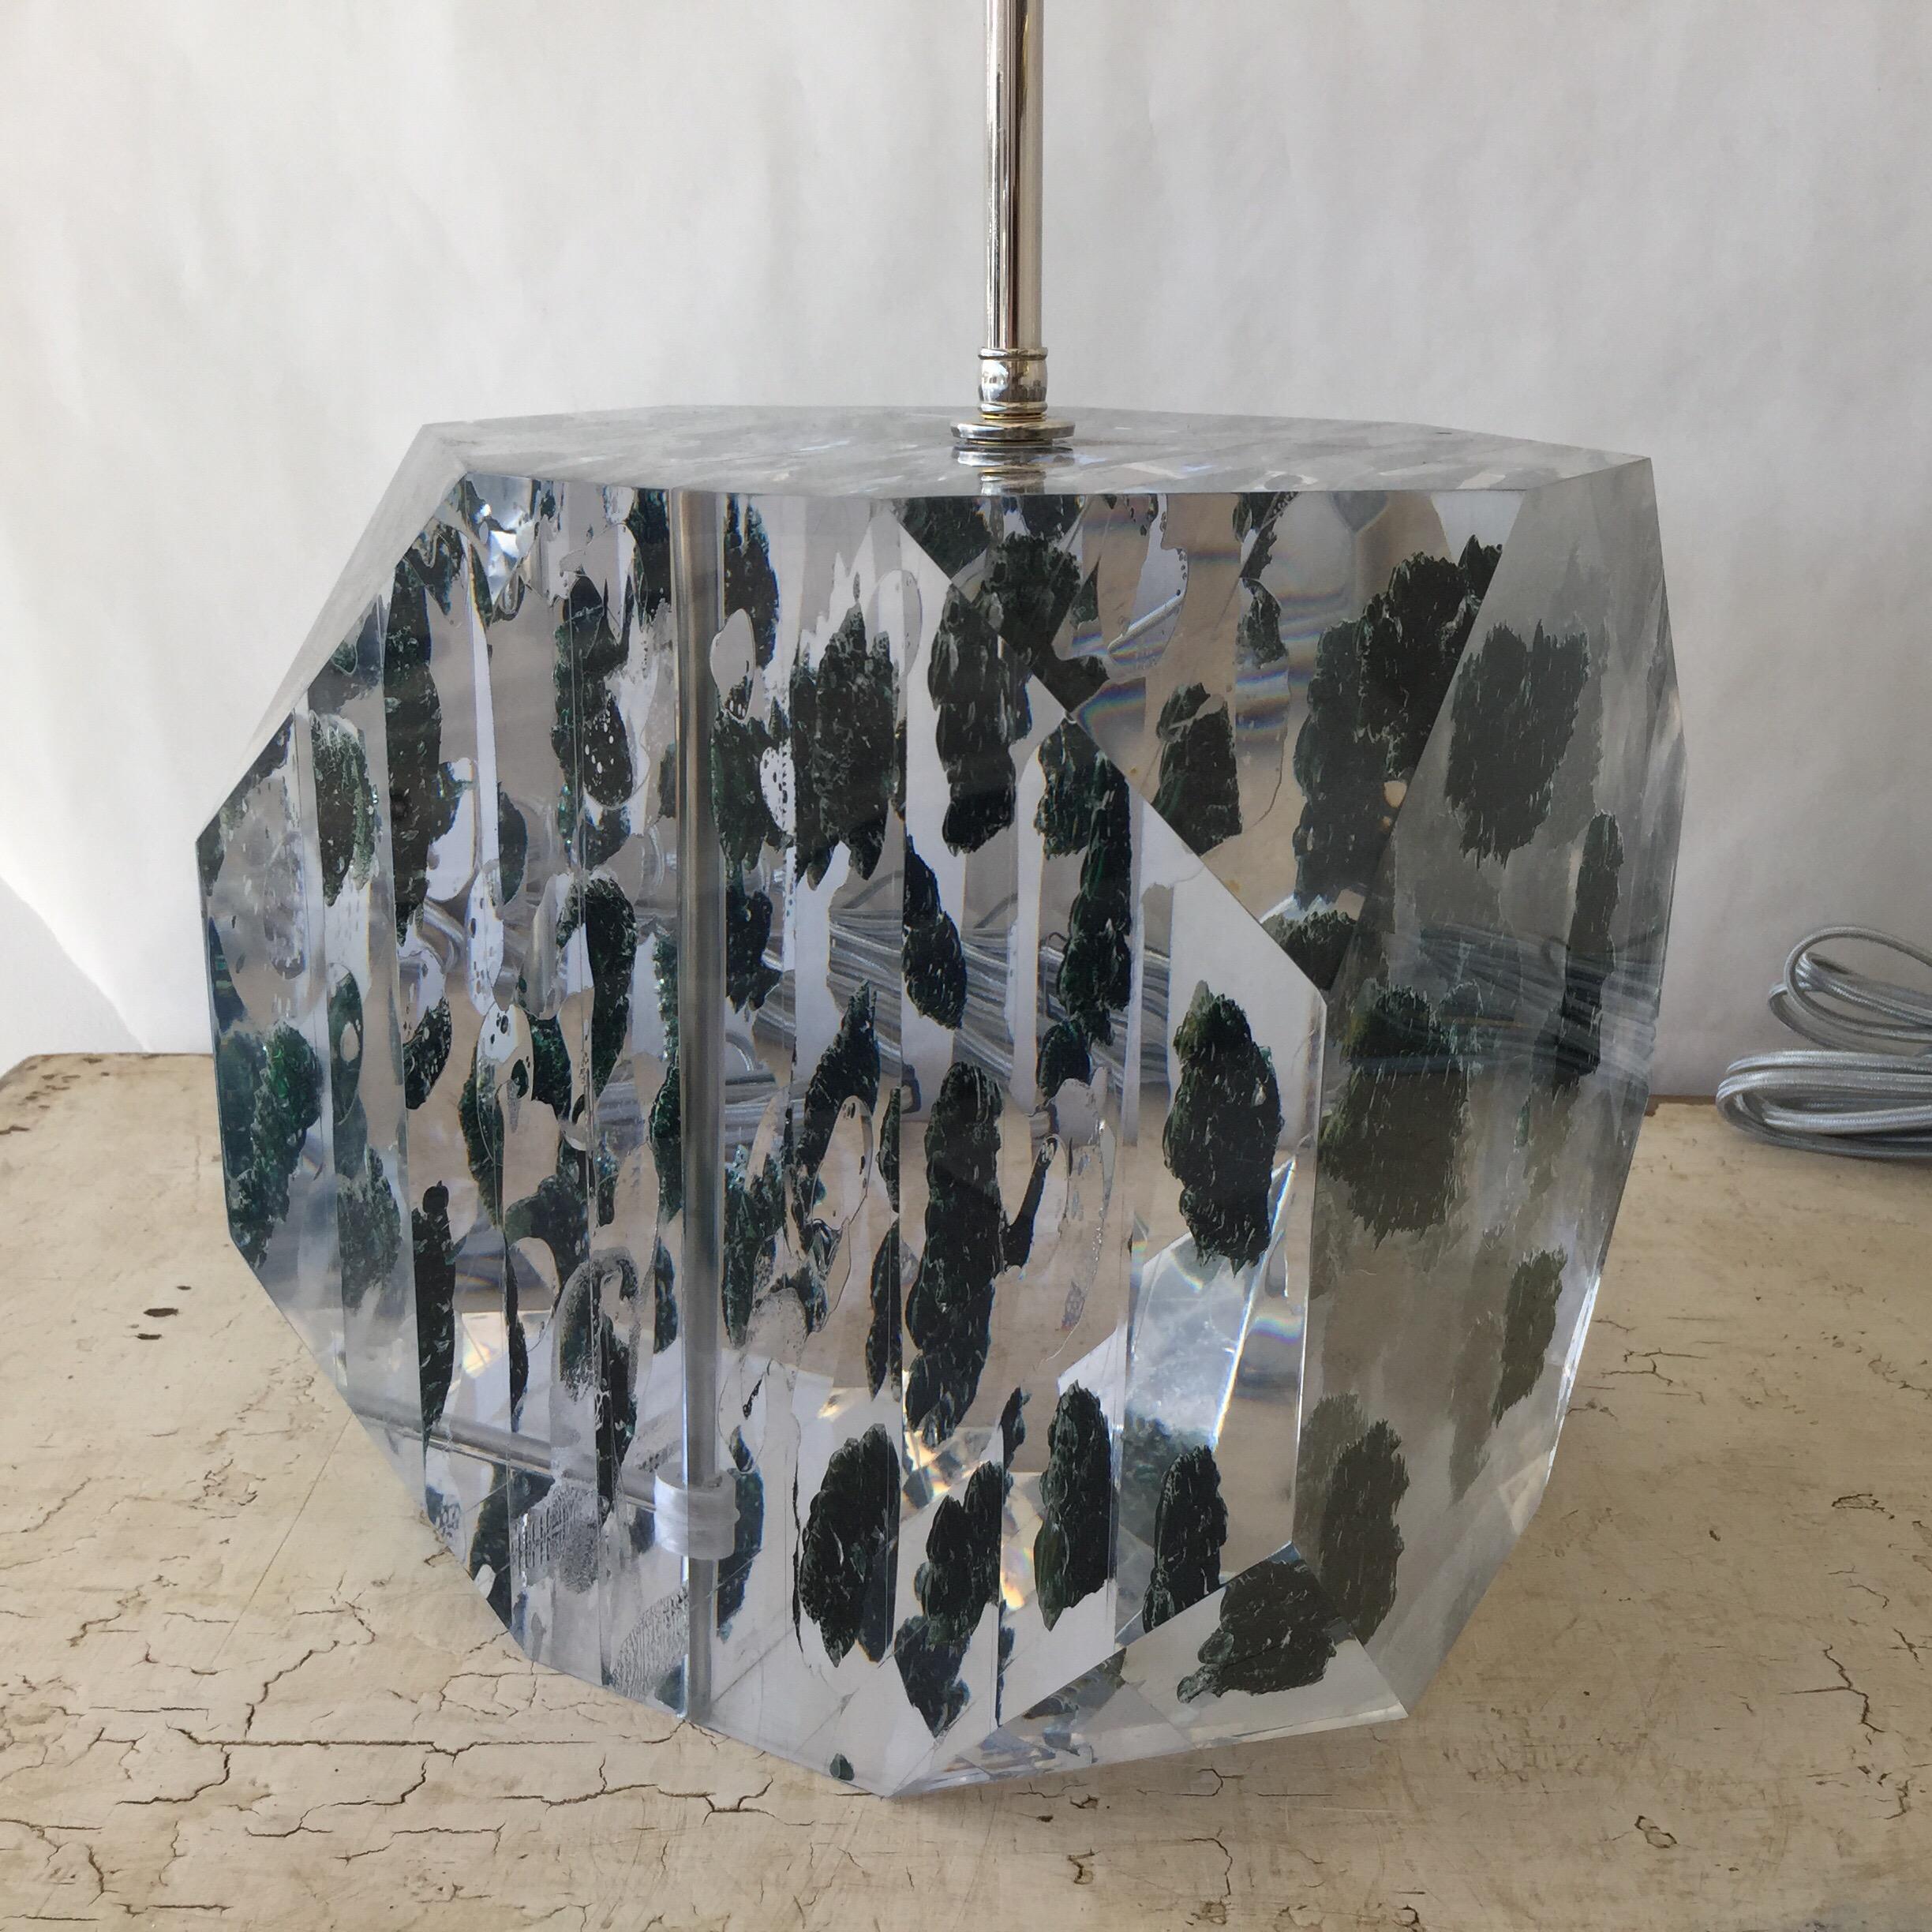 In hues of deep forest green and gold layered within these Lucite sheets, these table lamps are very heavy and quality crafted. Double cluster sockets and nickel pulls, silk wiring. by Freda Koblick.